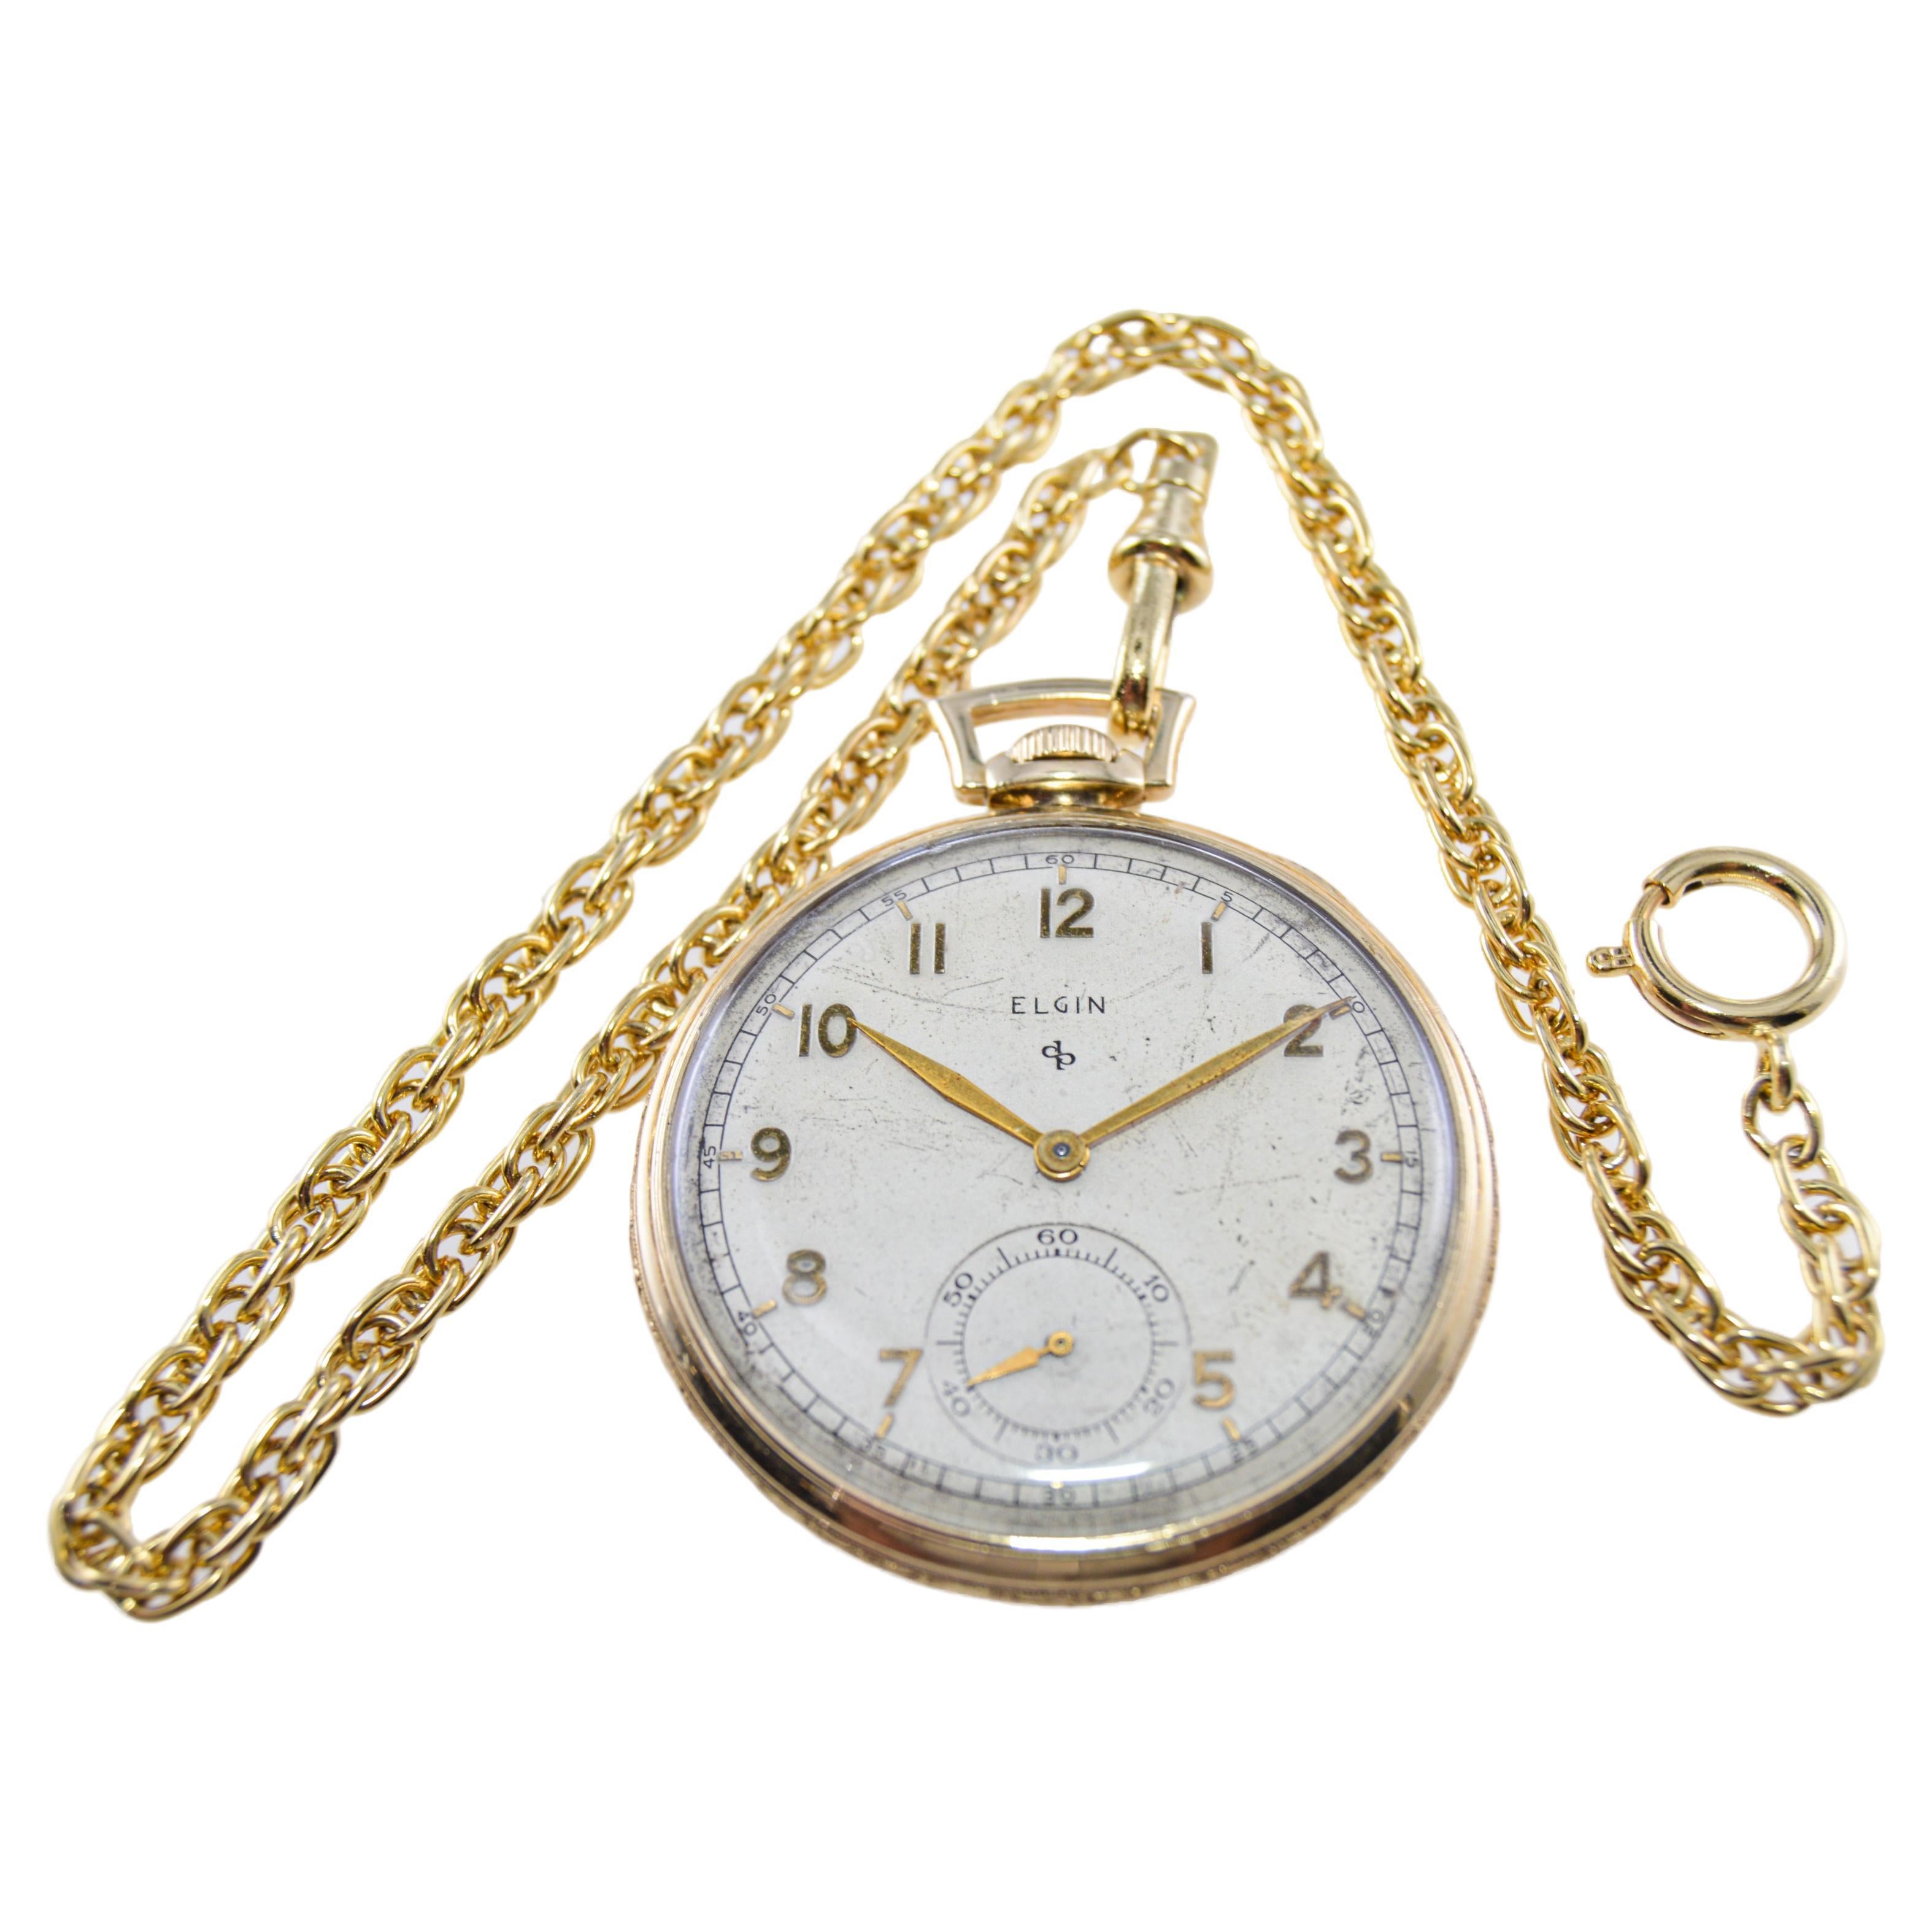 FACTORY / HOUSE: Elgin Watch Company
STYLE / REFERENCE: Open Faced Pocket Watch
METAL / MATERIAL: Yellow Gold Filled
CIRCA / YEAR: 1940's
DIMENSIONS / SIZE: Diameter 45mm
MOVEMENT / CALIBER: Manual Winding / 15 Jewels 
DIAL / HANDS: Original